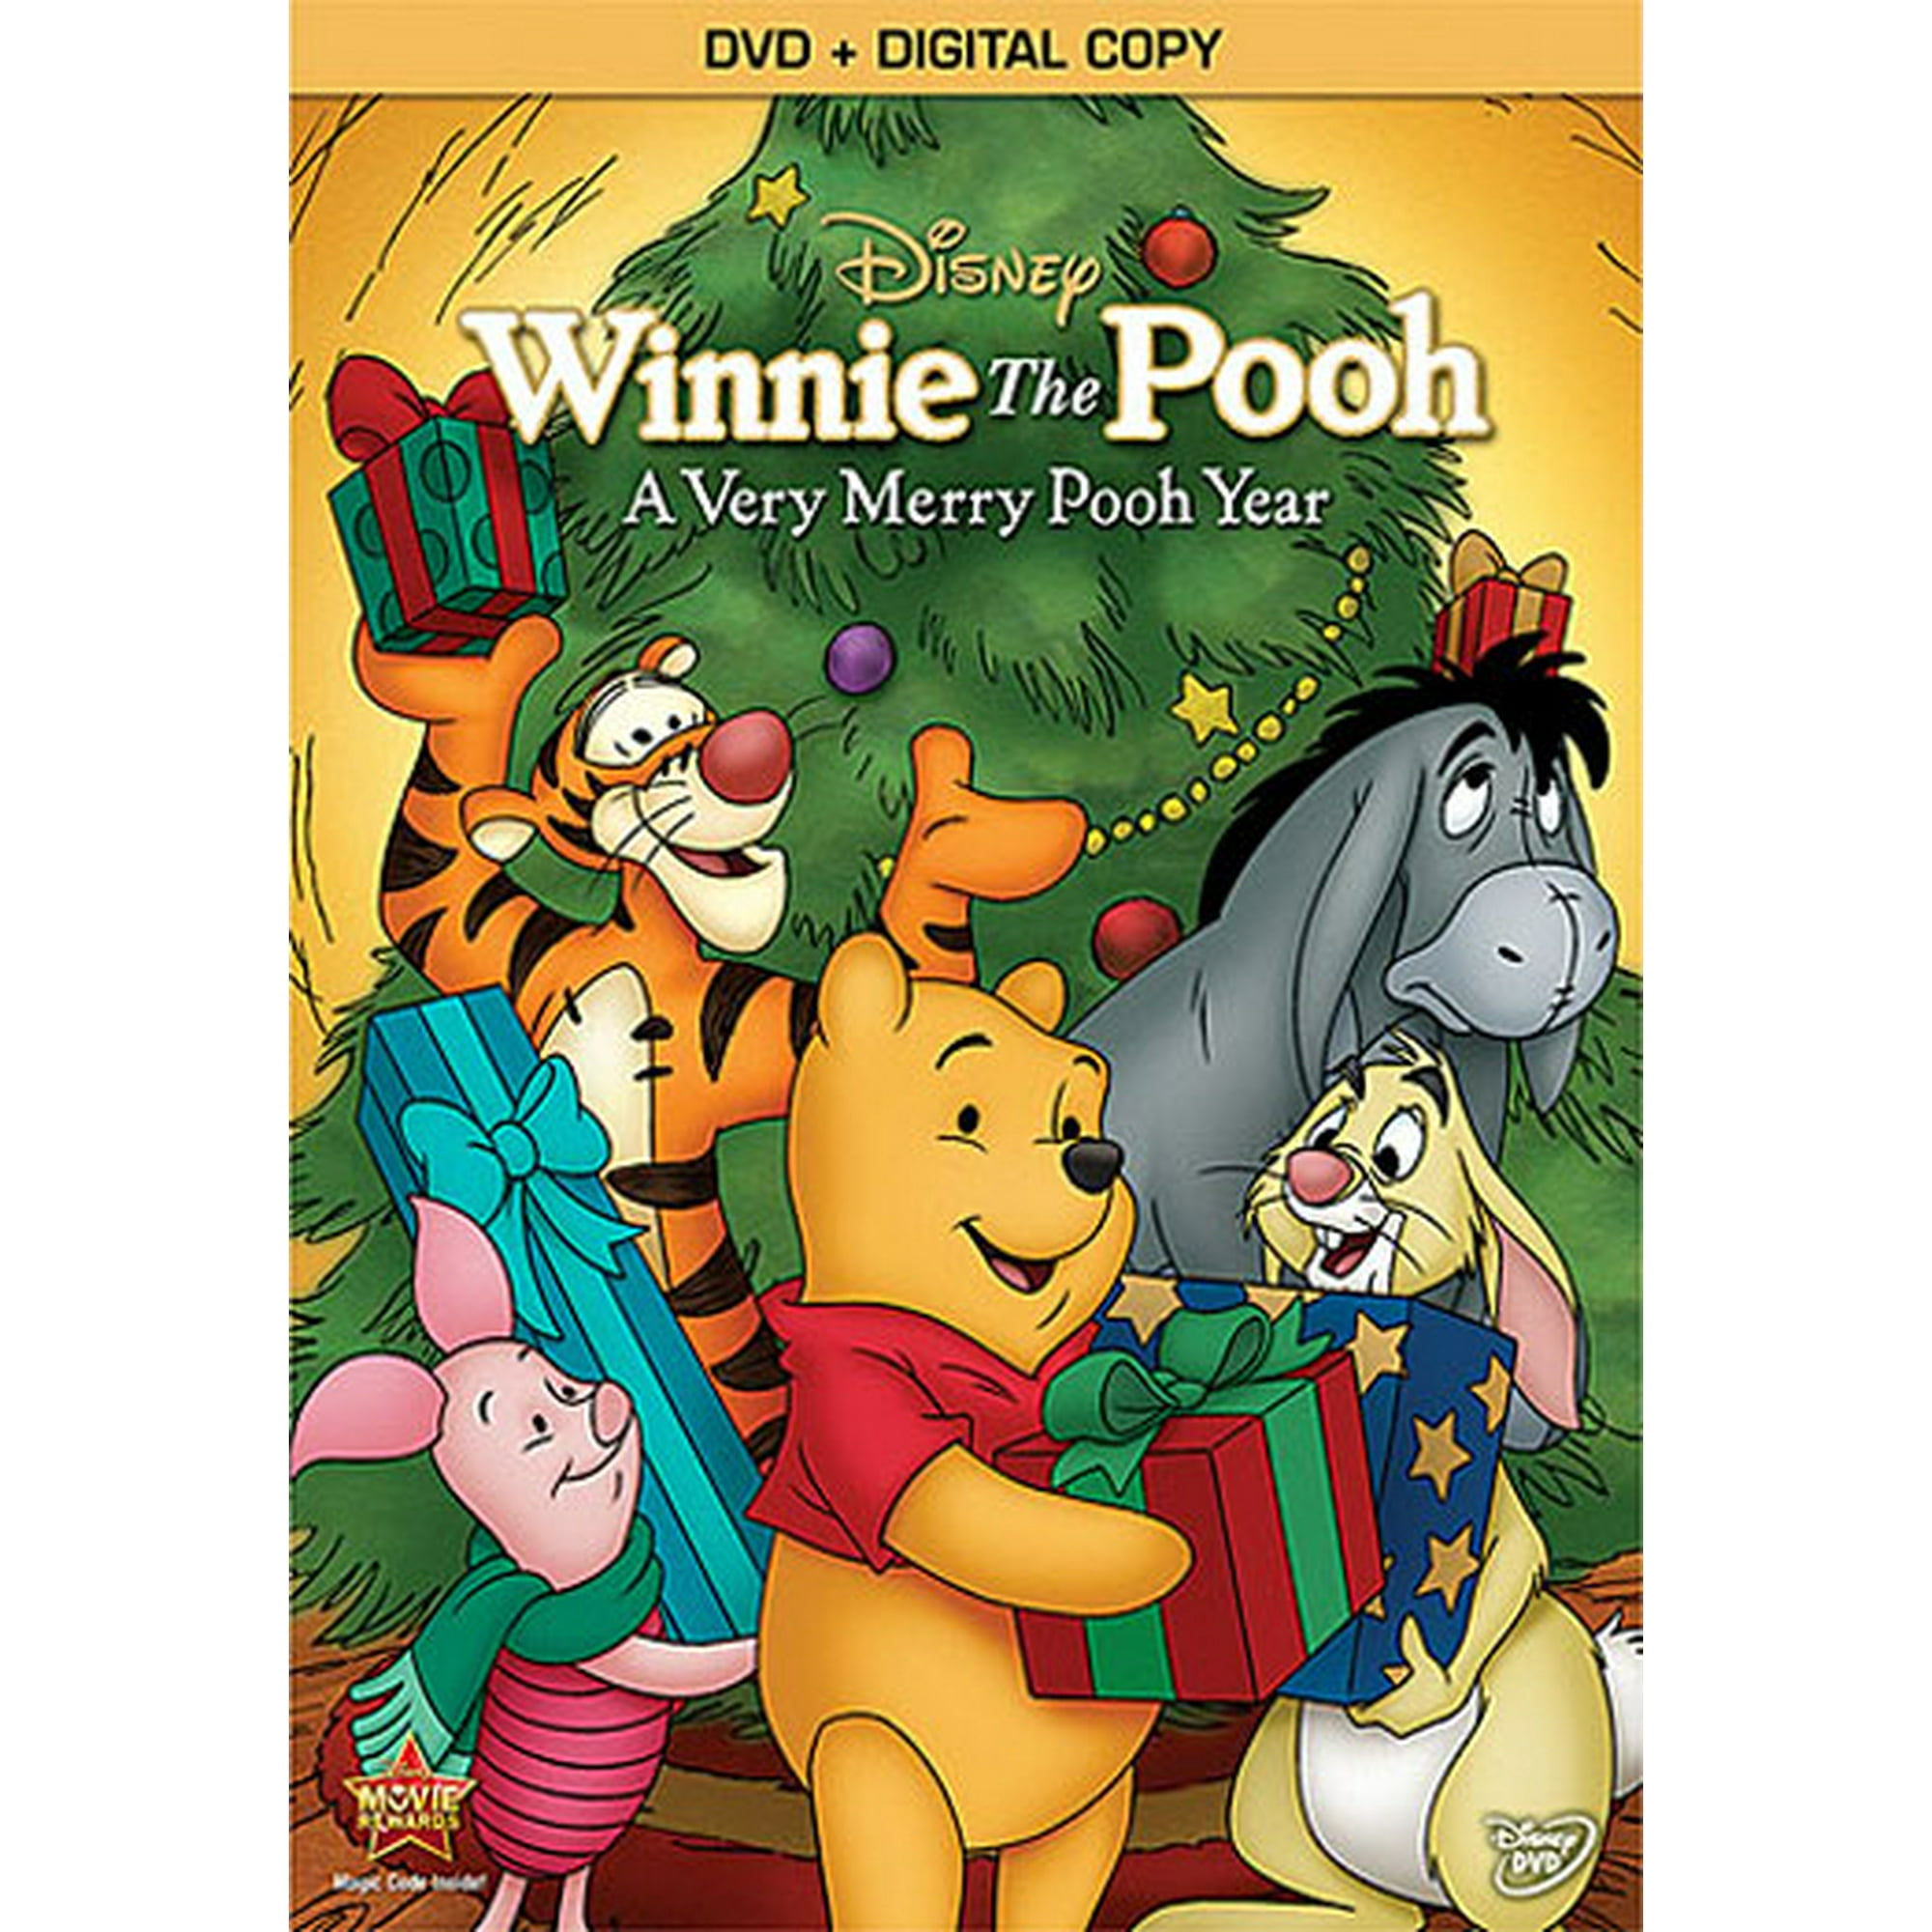 BUENA VISTA HOME VIDEO WINNIE THE POOH-VERY MERRY POOH YEAR-SPECIAL EDITION  (DVD/DC) D117528D | Walmart Canada